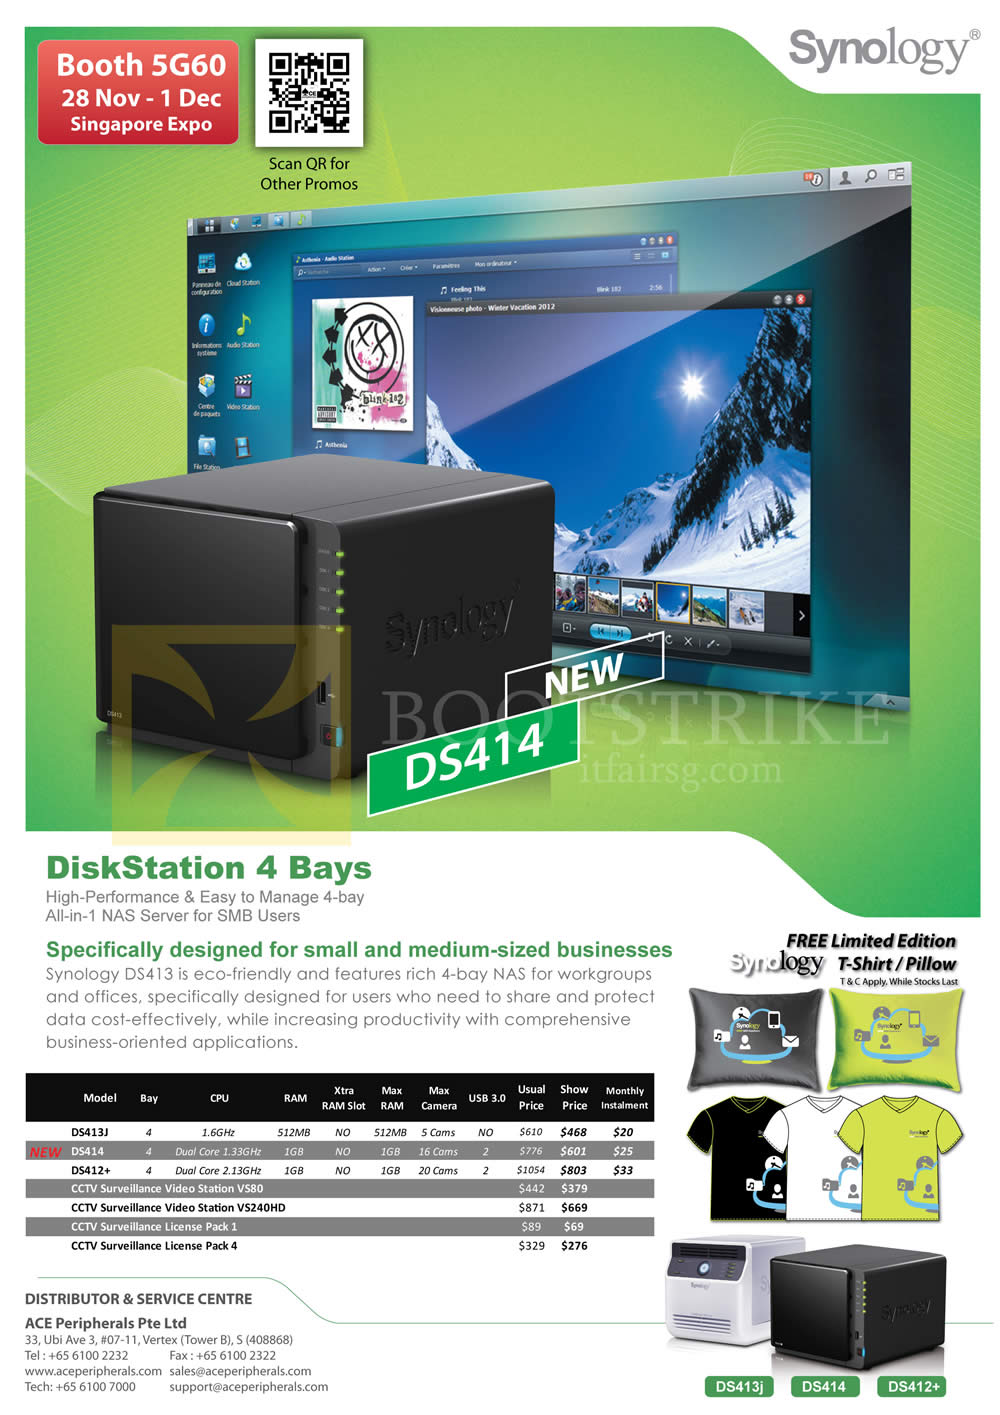 SITEX 2013 price list image brochure of Ace Peripherals Synology NAS DS413J DS413 DS414 DS412 Plus CCTV License